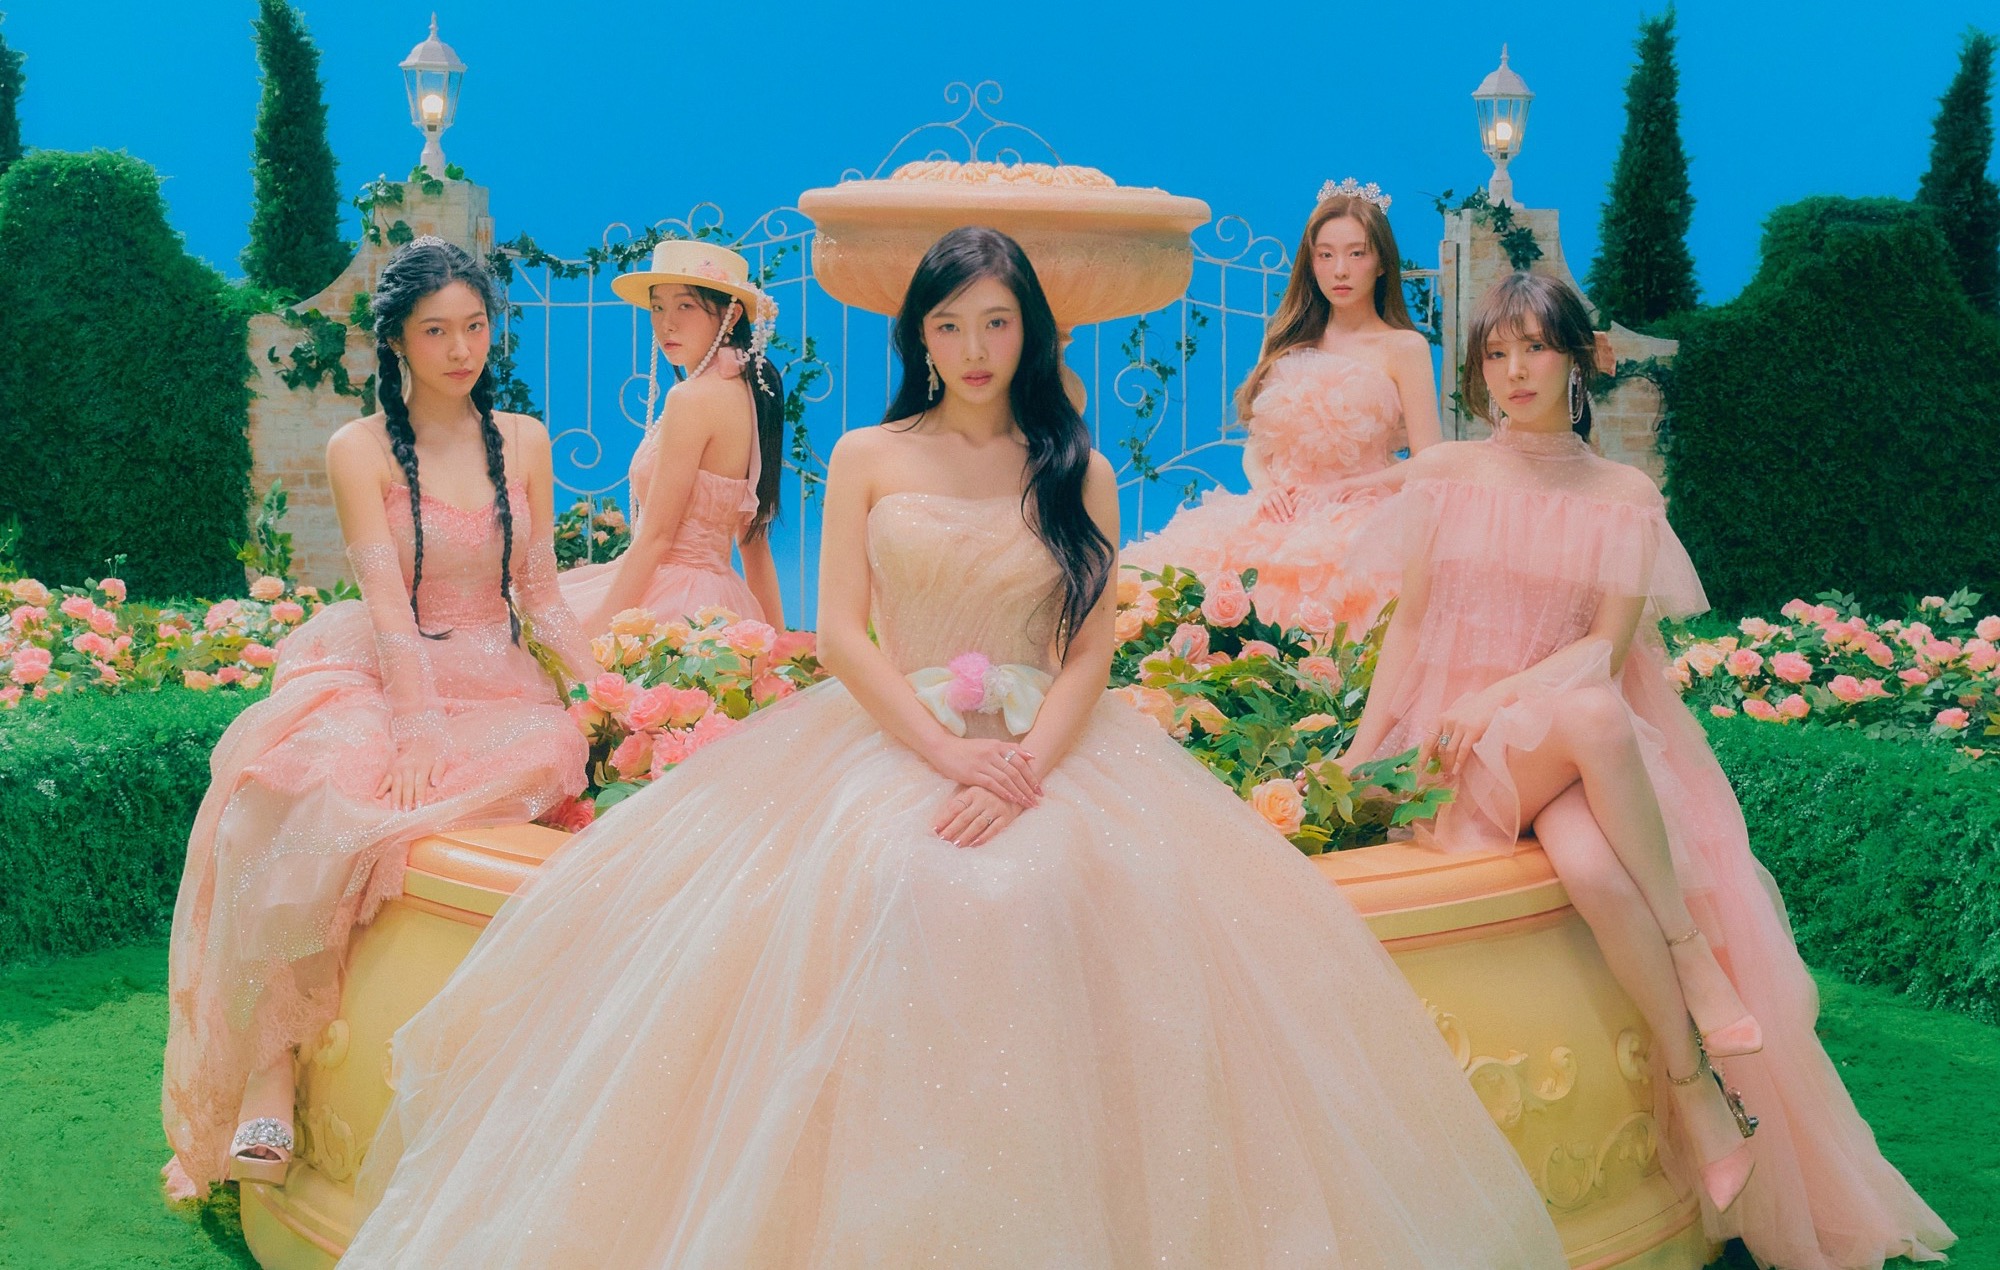 Red Velvet reveal 'The ReVe Festival 2022 My Rhythm' is the first of “many” releases this year